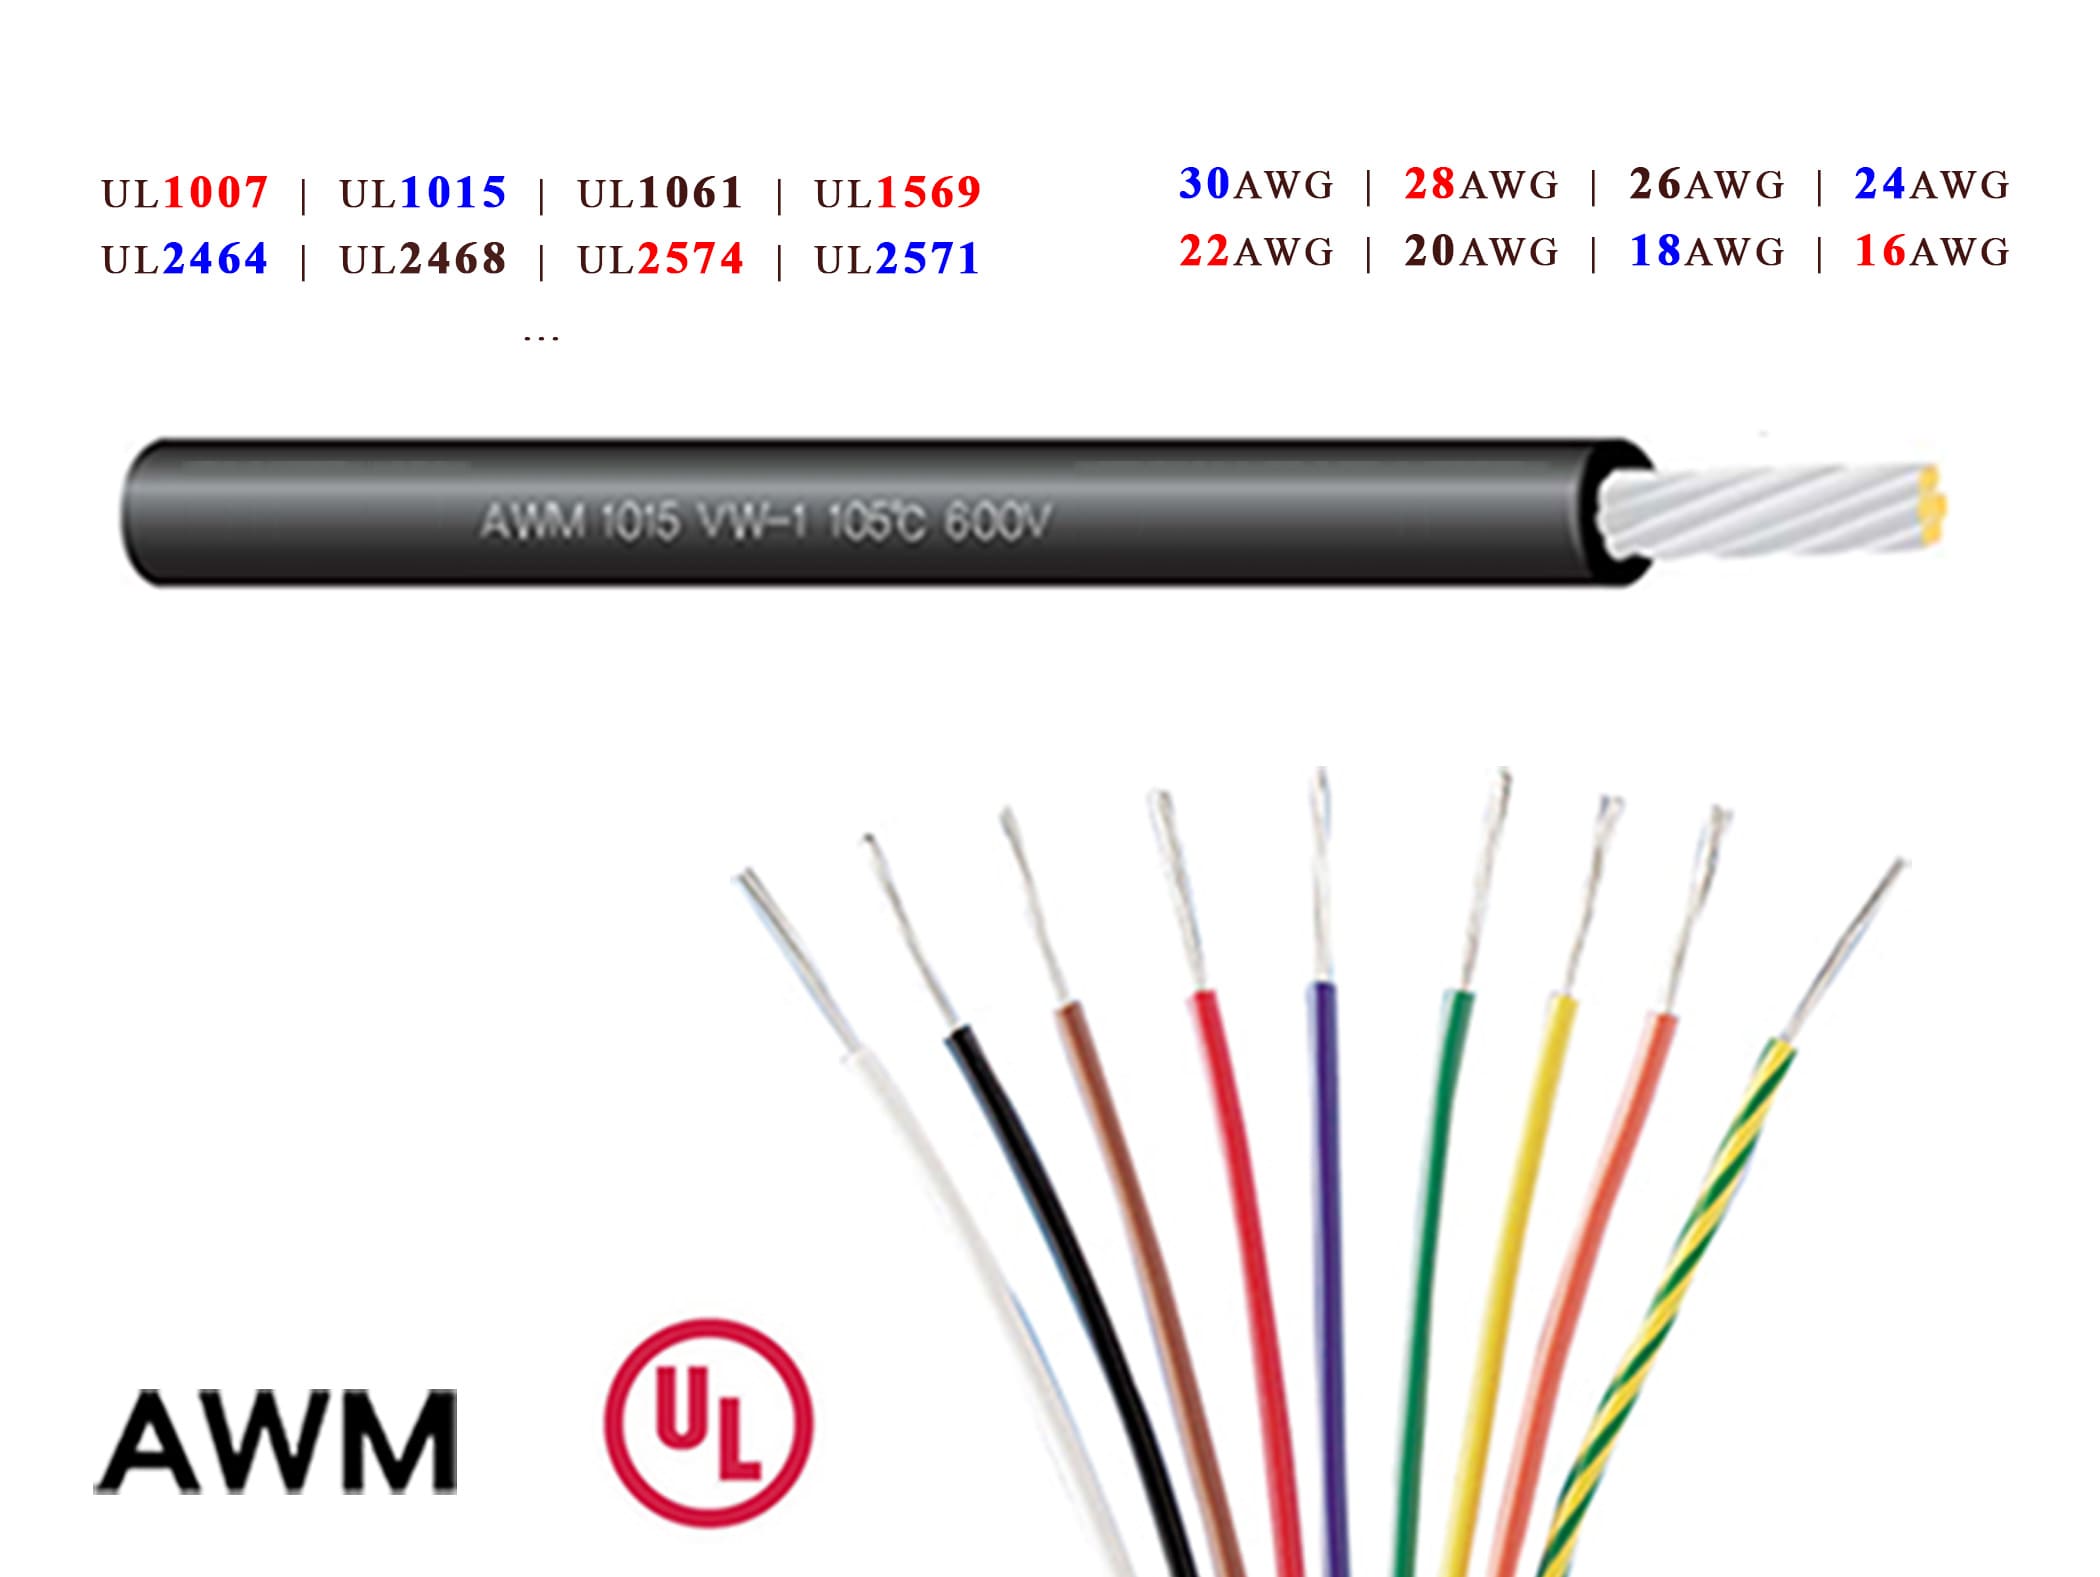 ul wire awm vw-1 ft1 ft2 mtw 8awg 10awg 12awg 14awg 16awg 18awg 20awg 22awg 24awg 26awg 28awg 30awg; ul wire; ul awm wires; ul awm ft1 ft2; ul awm ft1 ft2 wires; ul awm vw-1 mtw; ul awm vw-1 mtw wires; ul awm awg; ul awm awg wires;